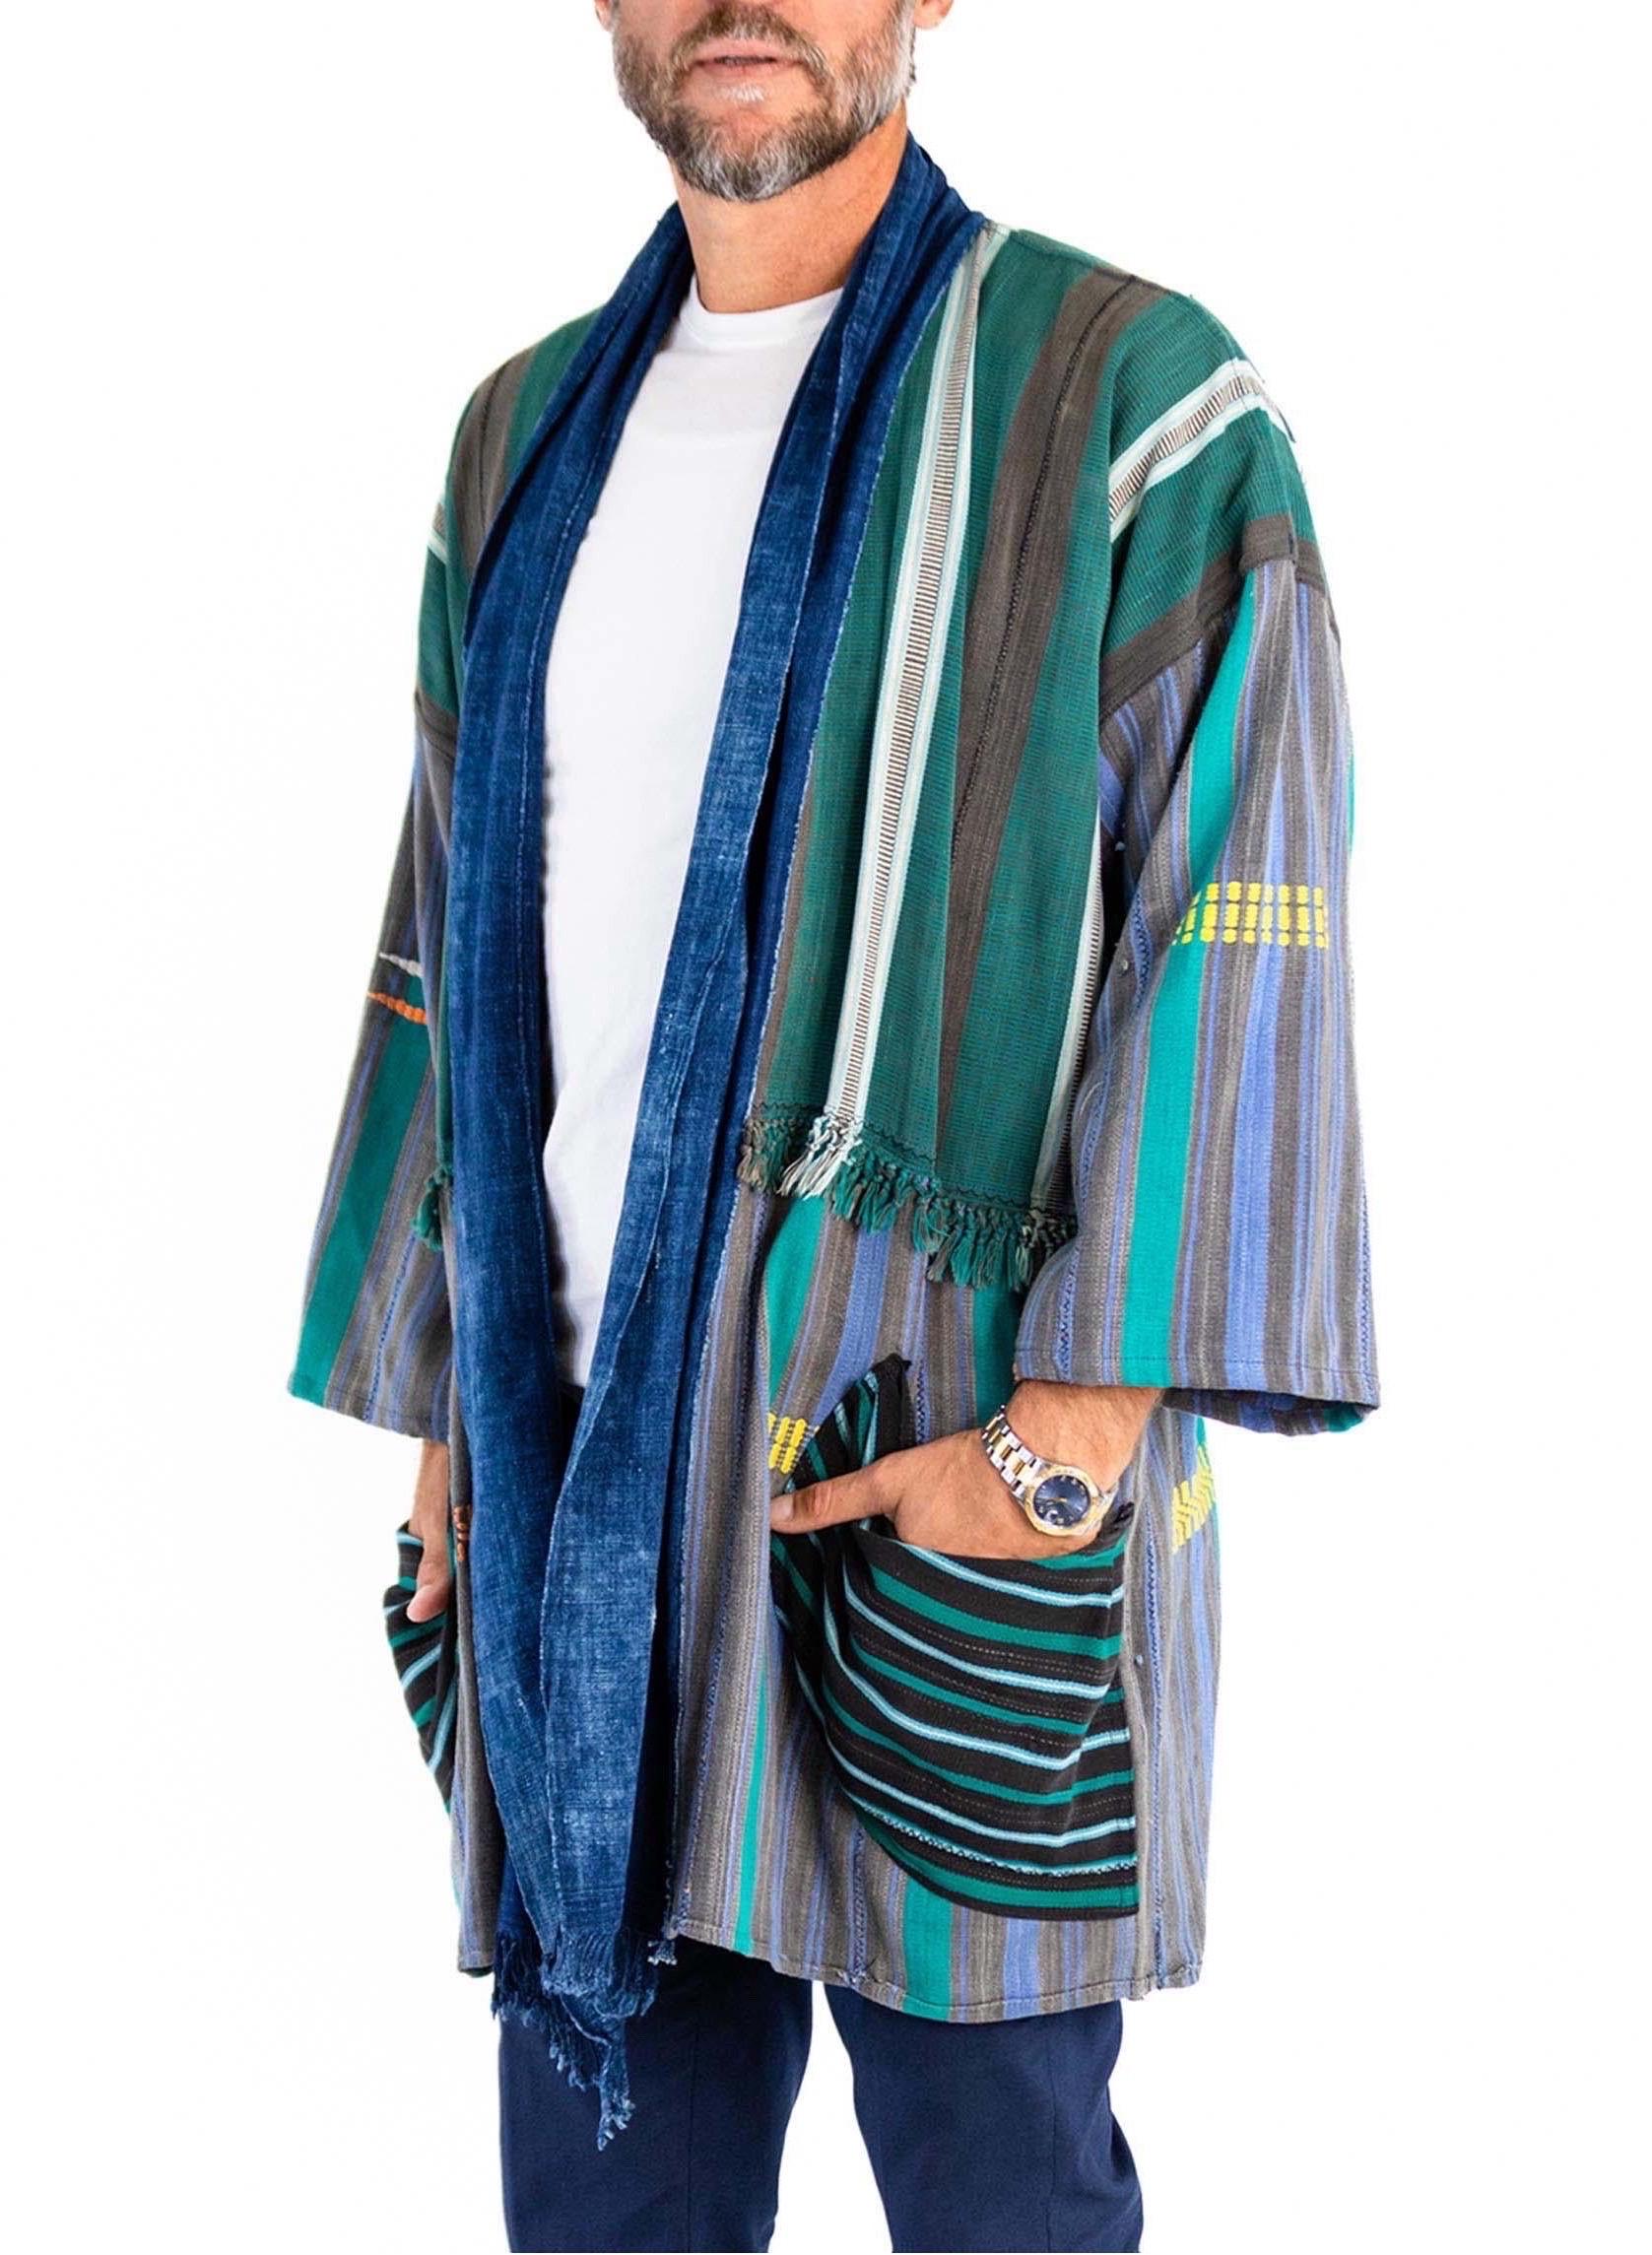 MORPHEW COLLECTION West African Indigo Cotton Green And Black Striped Beach Coat Duster
MORPHEW COLLECTION is made entirely by hand in our NYC Ateliér of rare antique materials sourced from around the globe. Our sustainable vintage materials